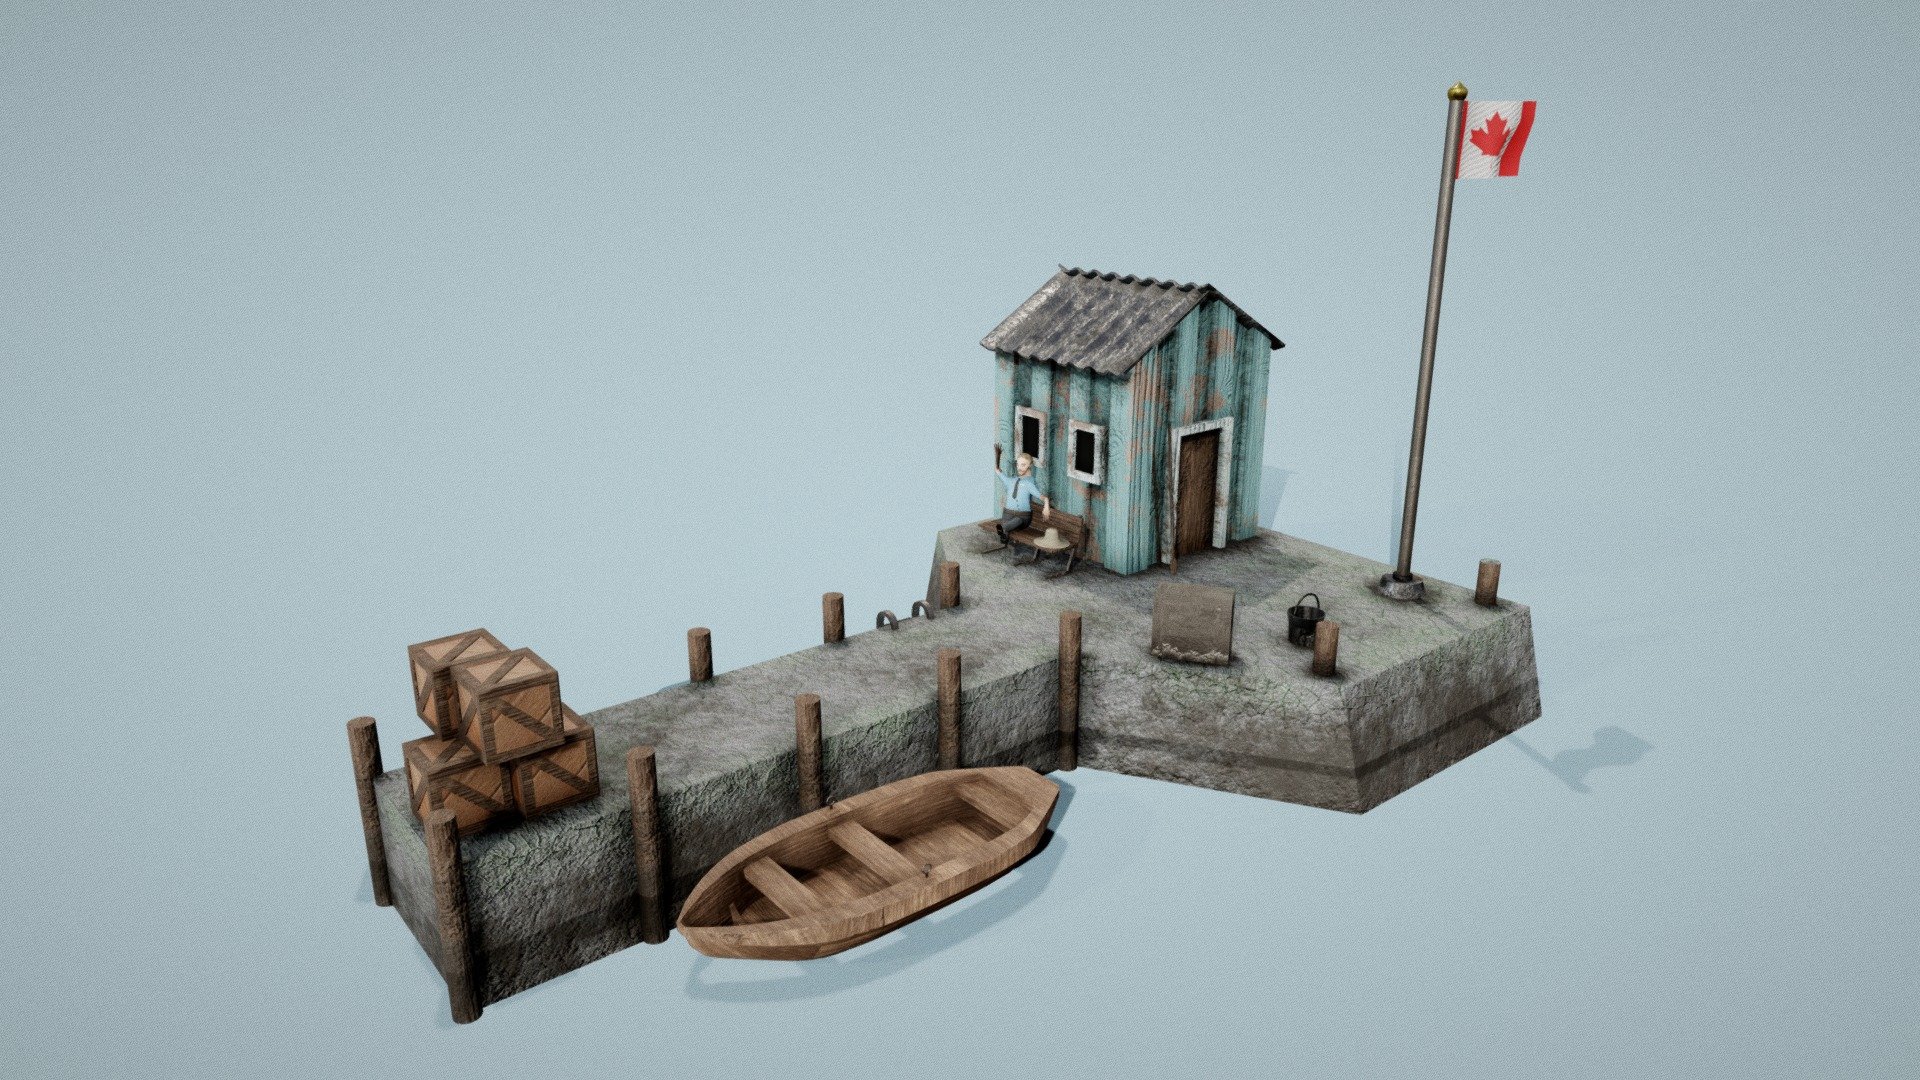 This is a small harbour somewhere in Canada. It does not see much traffic, but its harbour master still works hard to ensure that it's kept orderly. Sometimes though, even he needs to take a break. 

Modelled in Maya, textured in Substance Painter, and character rigged with Mixamo 3d model